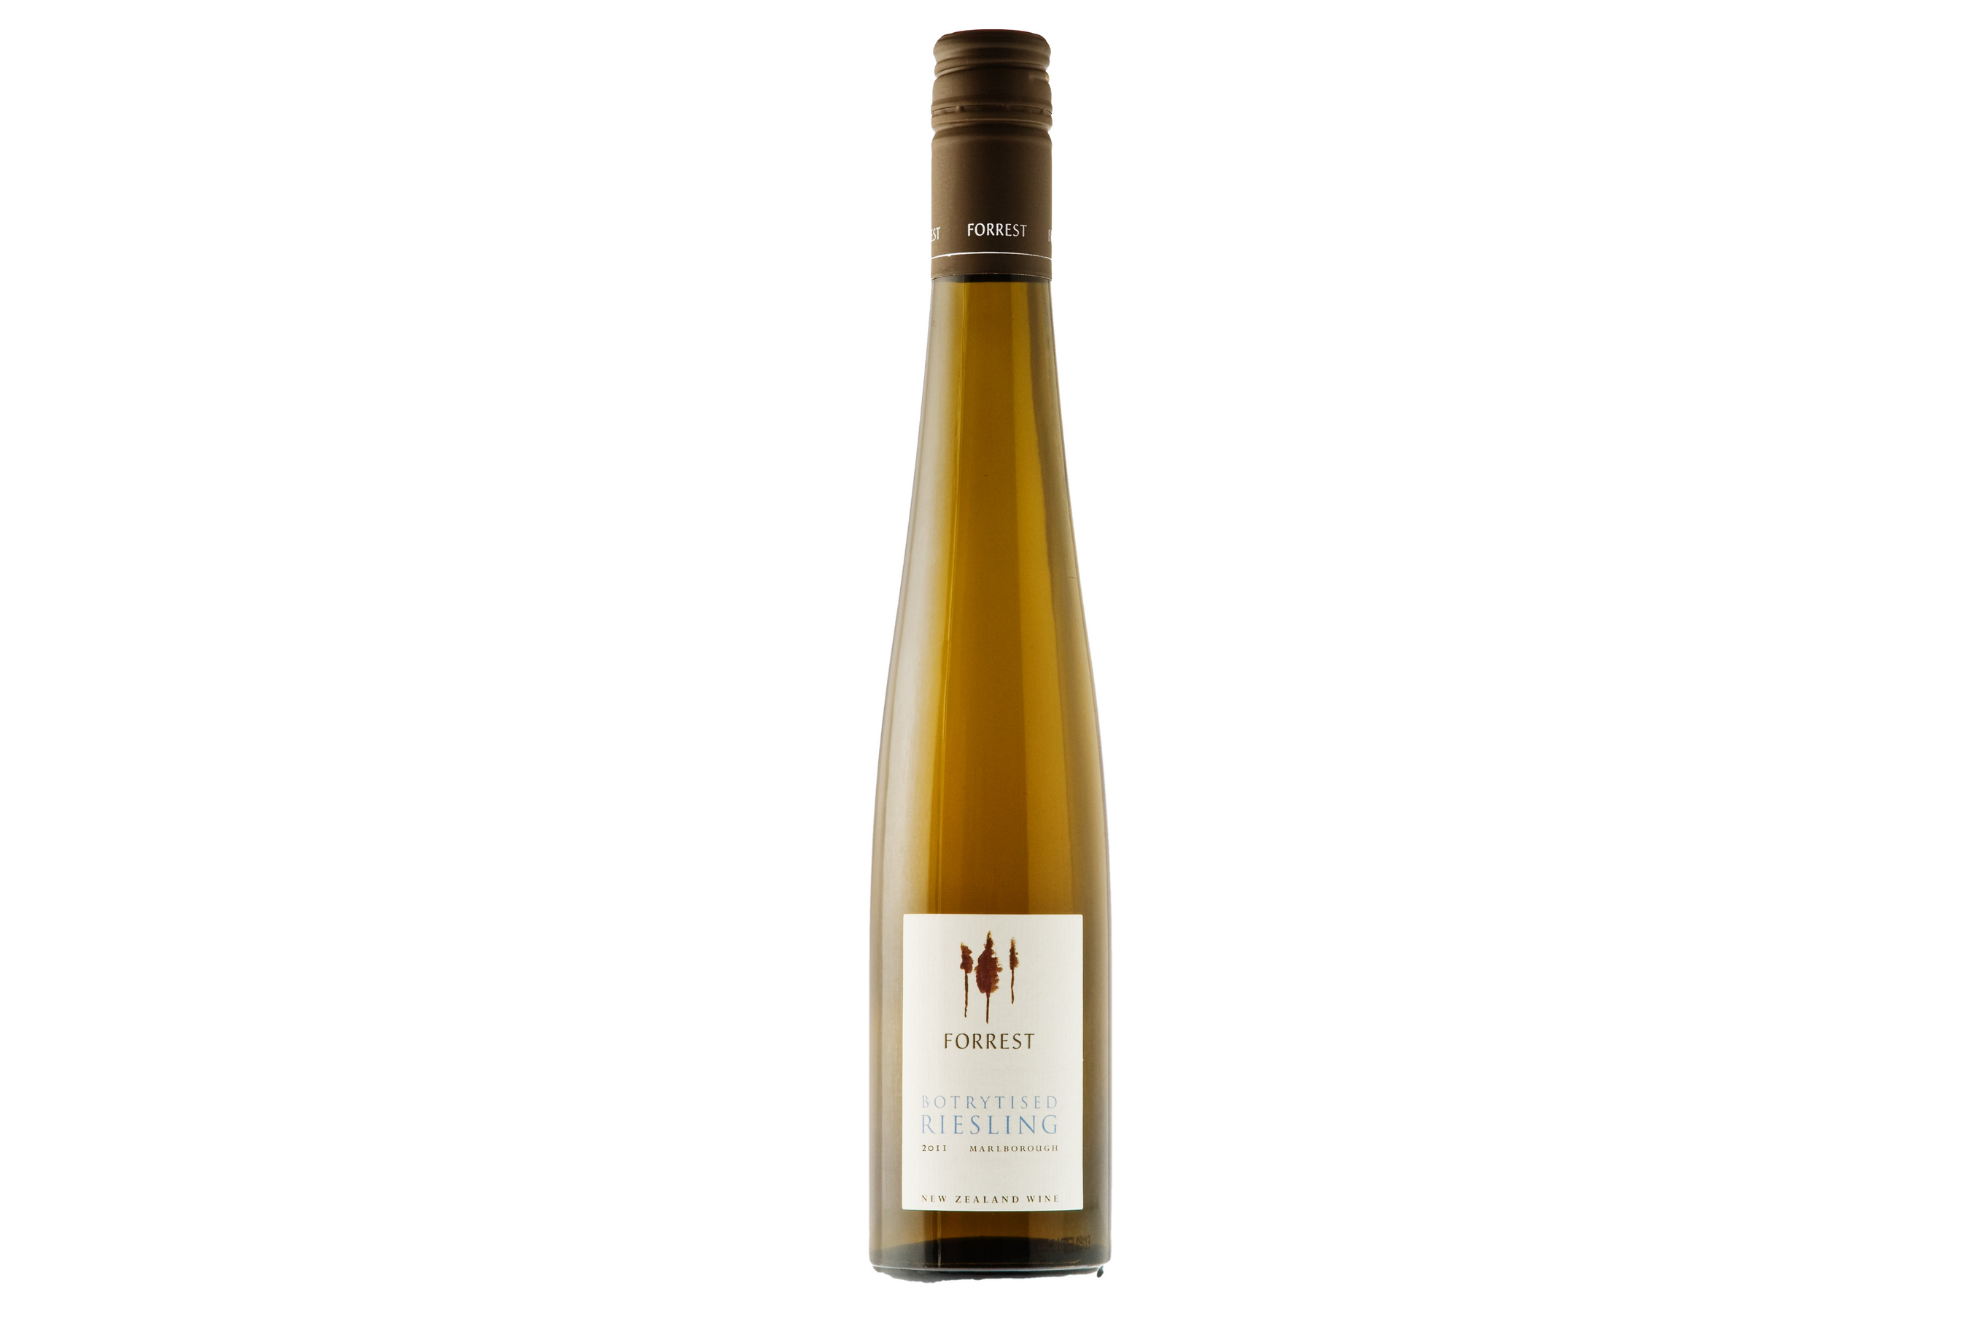 Forrest Wines Botrytised Riesling Marlborough 2018 37.5cl